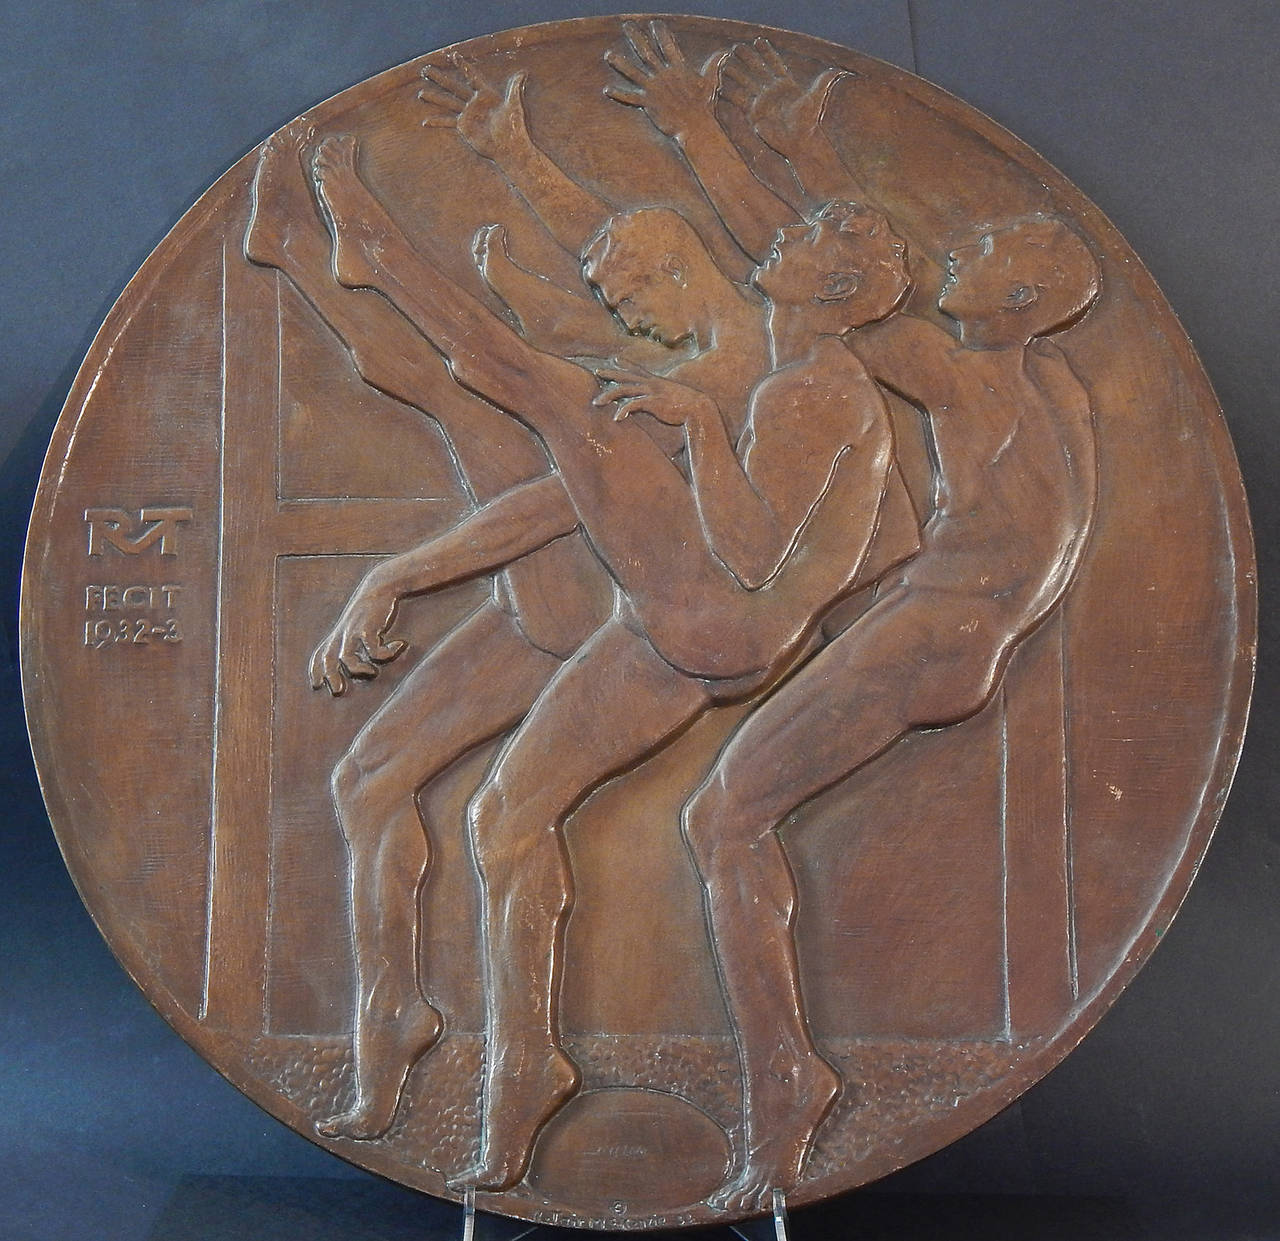 Perhaps the greatest masterpiece ever created by Robert Tait McKenzie, widely considered the finest sculptor of athletes in the 1920s and 1930s, 